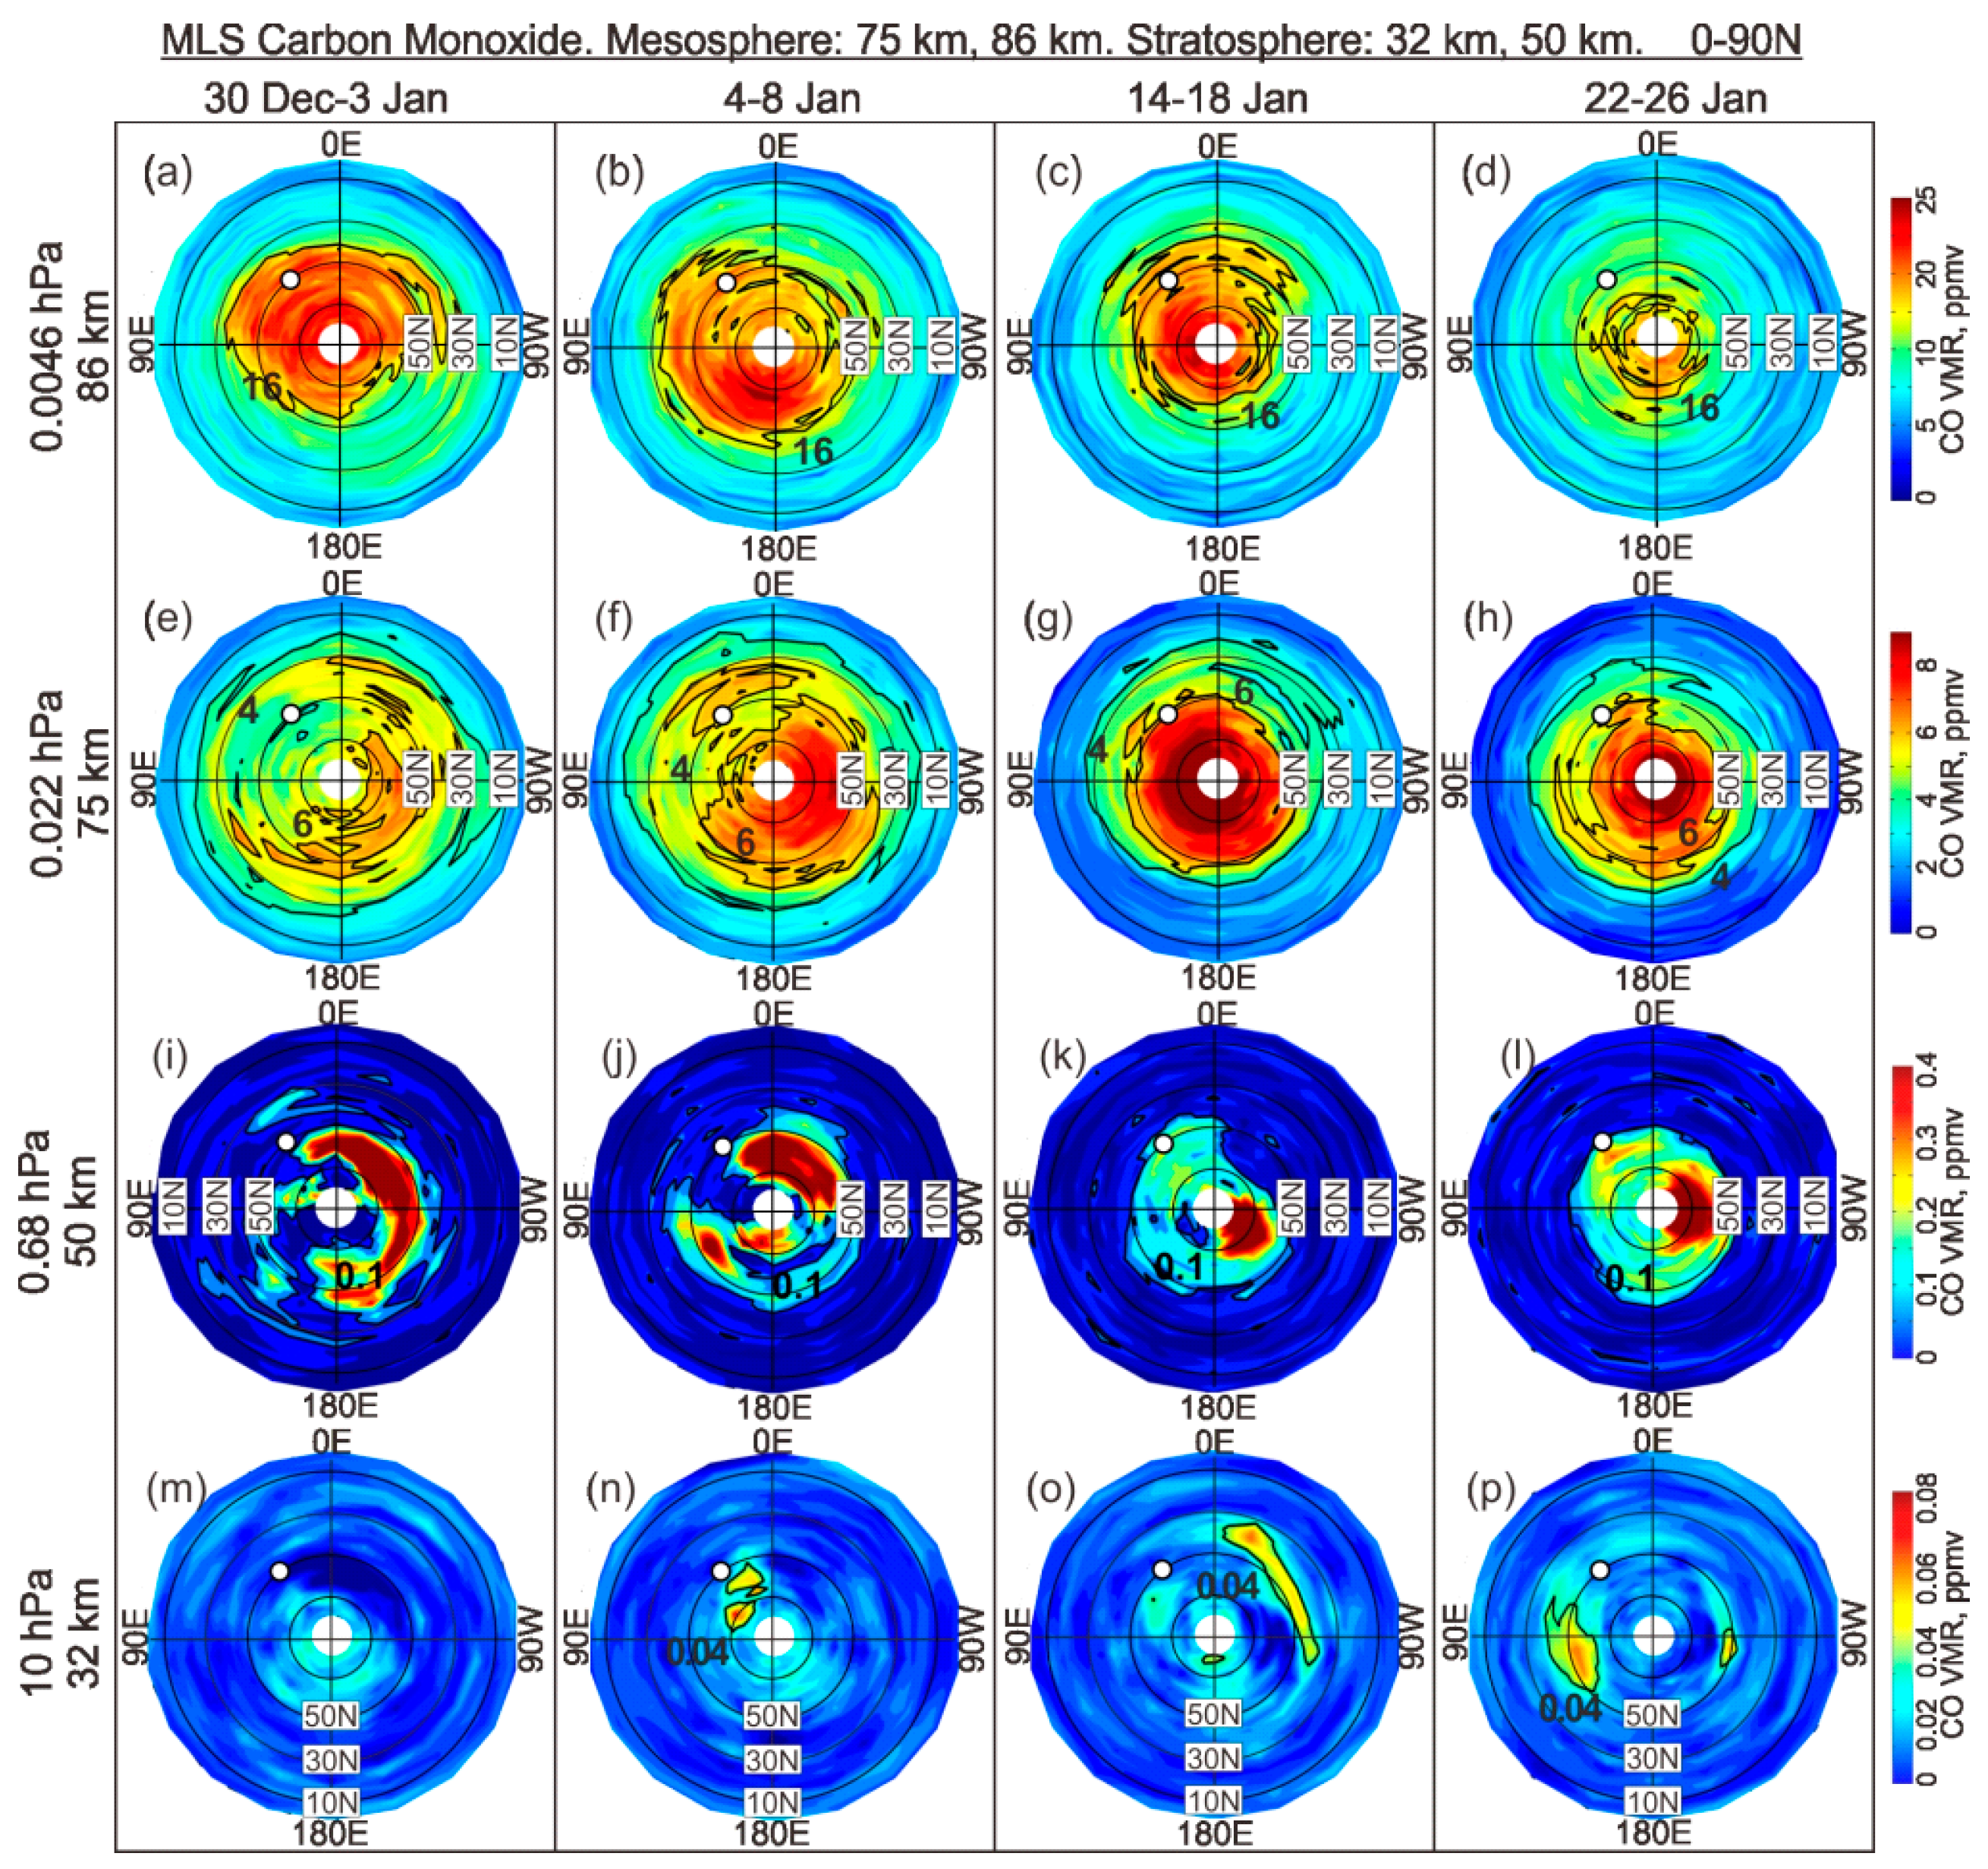 Remote Sensing Free Full Text Comparison Of Major Sudden Stratospheric Warming Impacts On The Mid Latitude Mesosphere Based On Local Microwave Radiometer Co Observations In 18 And 19 Html